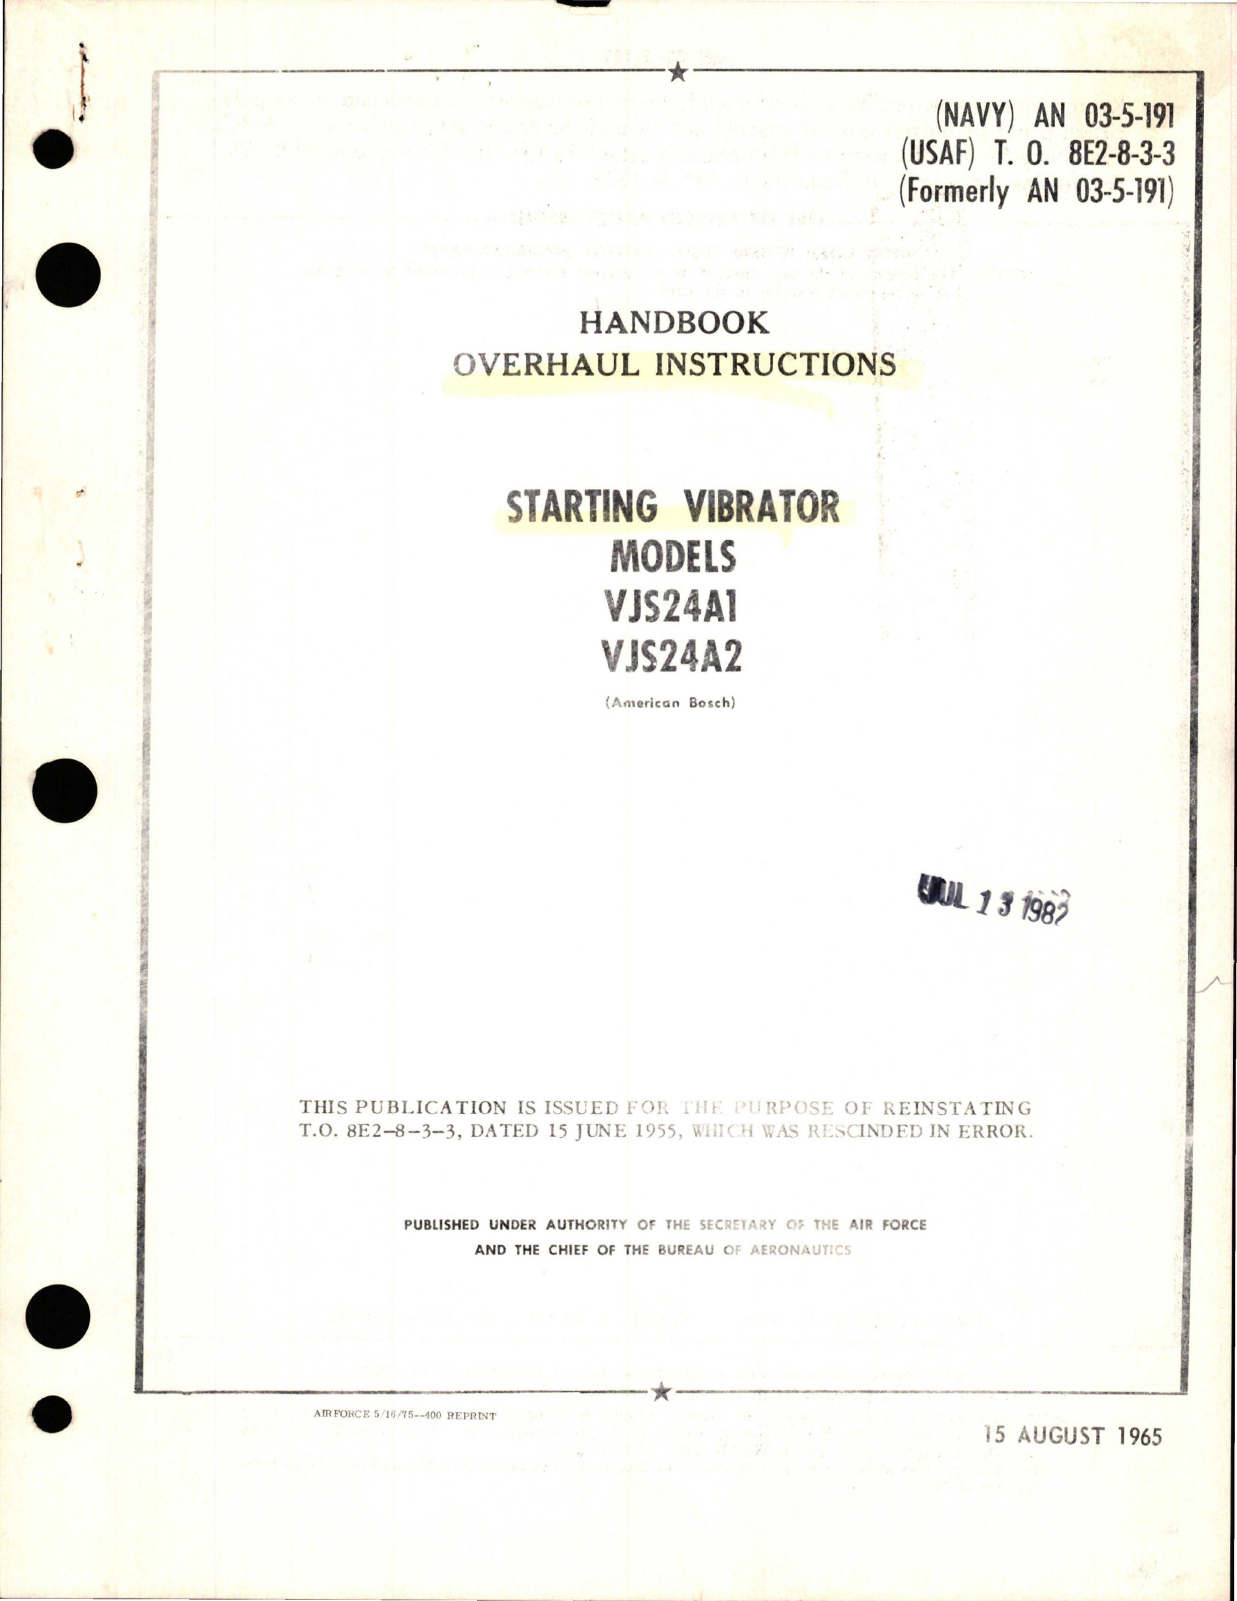 Sample page 1 from AirCorps Library document: Overhaul Instructions for Starting Vibrator - Models VJS24A1 and VJS24A2